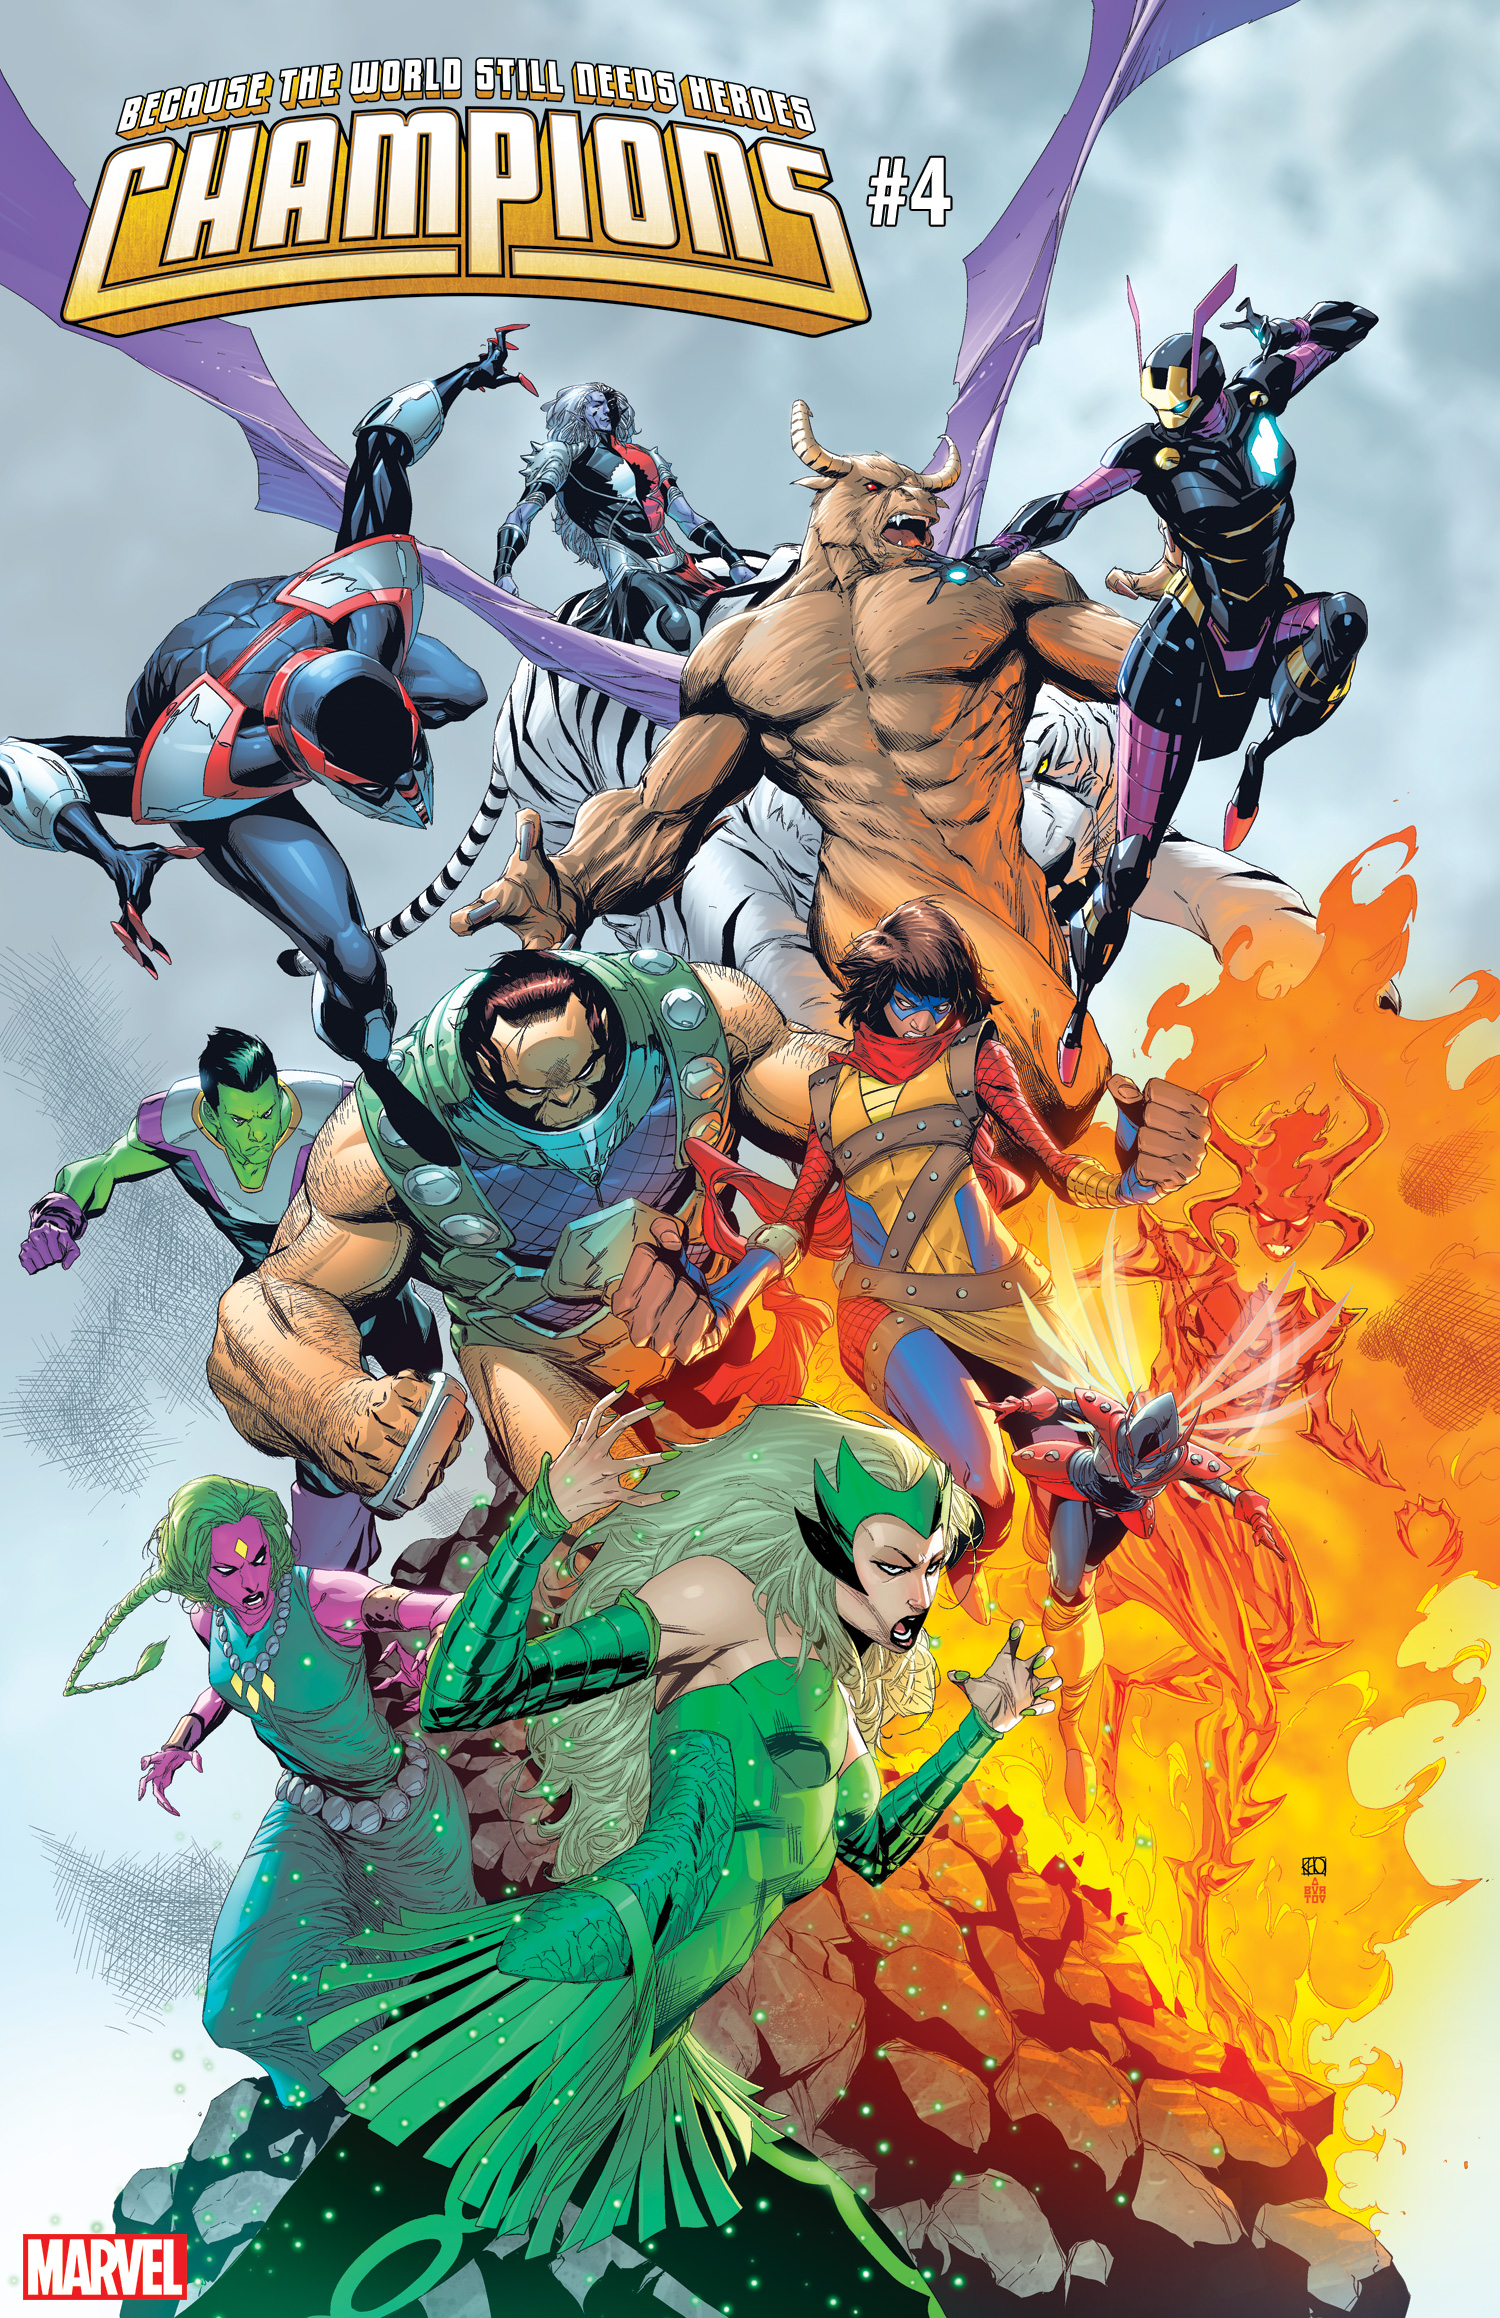 WAR OF THE REALMS: Marvel Heroes as Asgardians! – FIRST COMICS NEWS